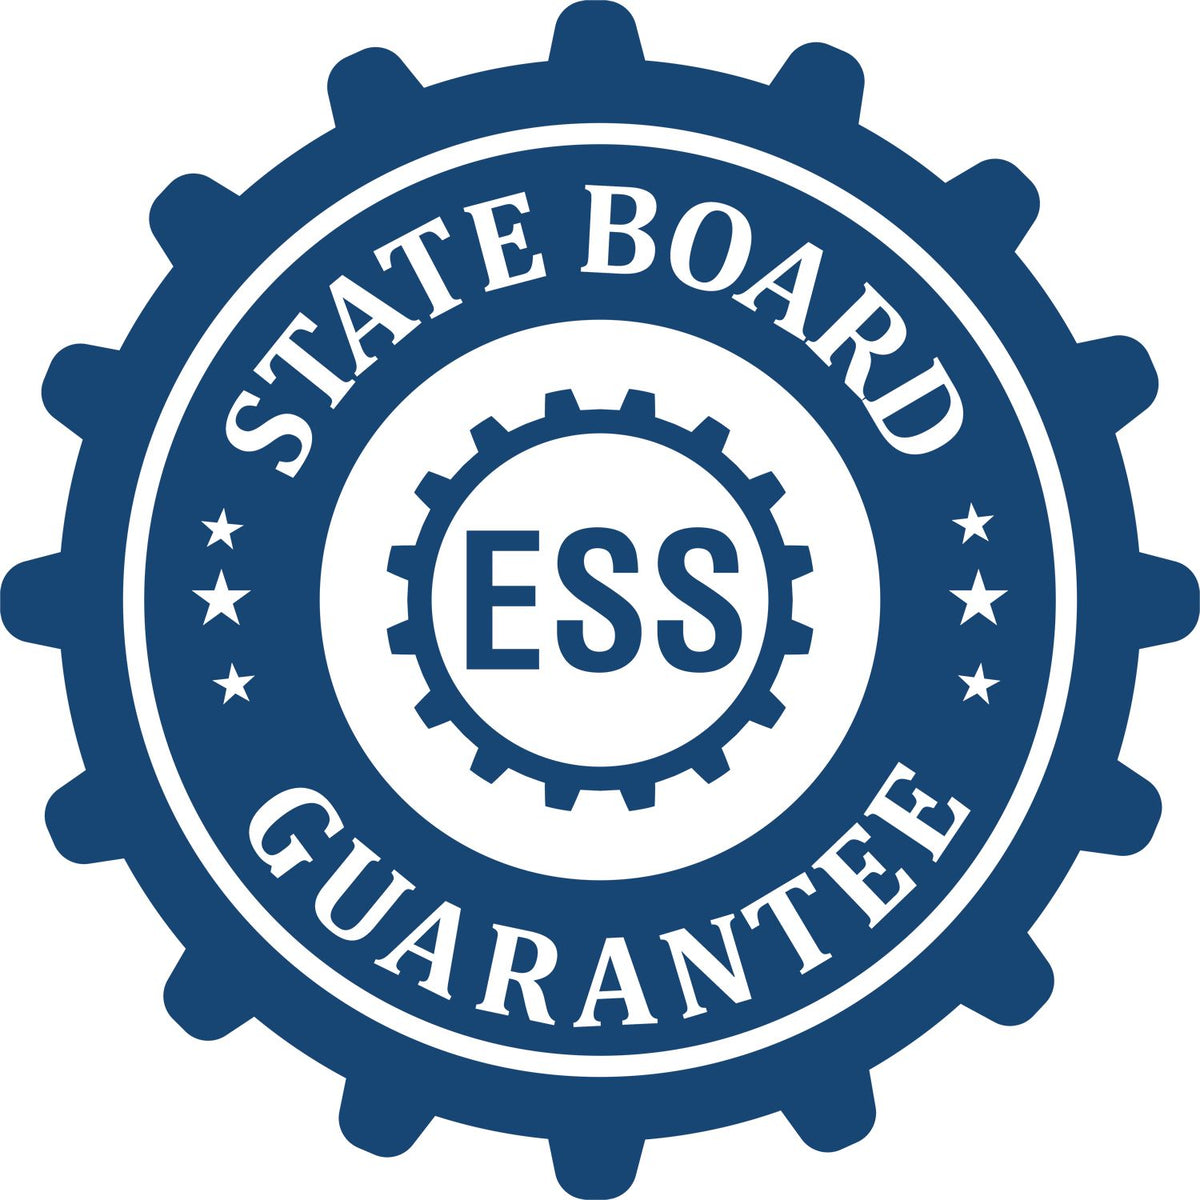 An emblem in a gear shape illustrating a state board guarantee for the Hybrid Utah Engineer Seal